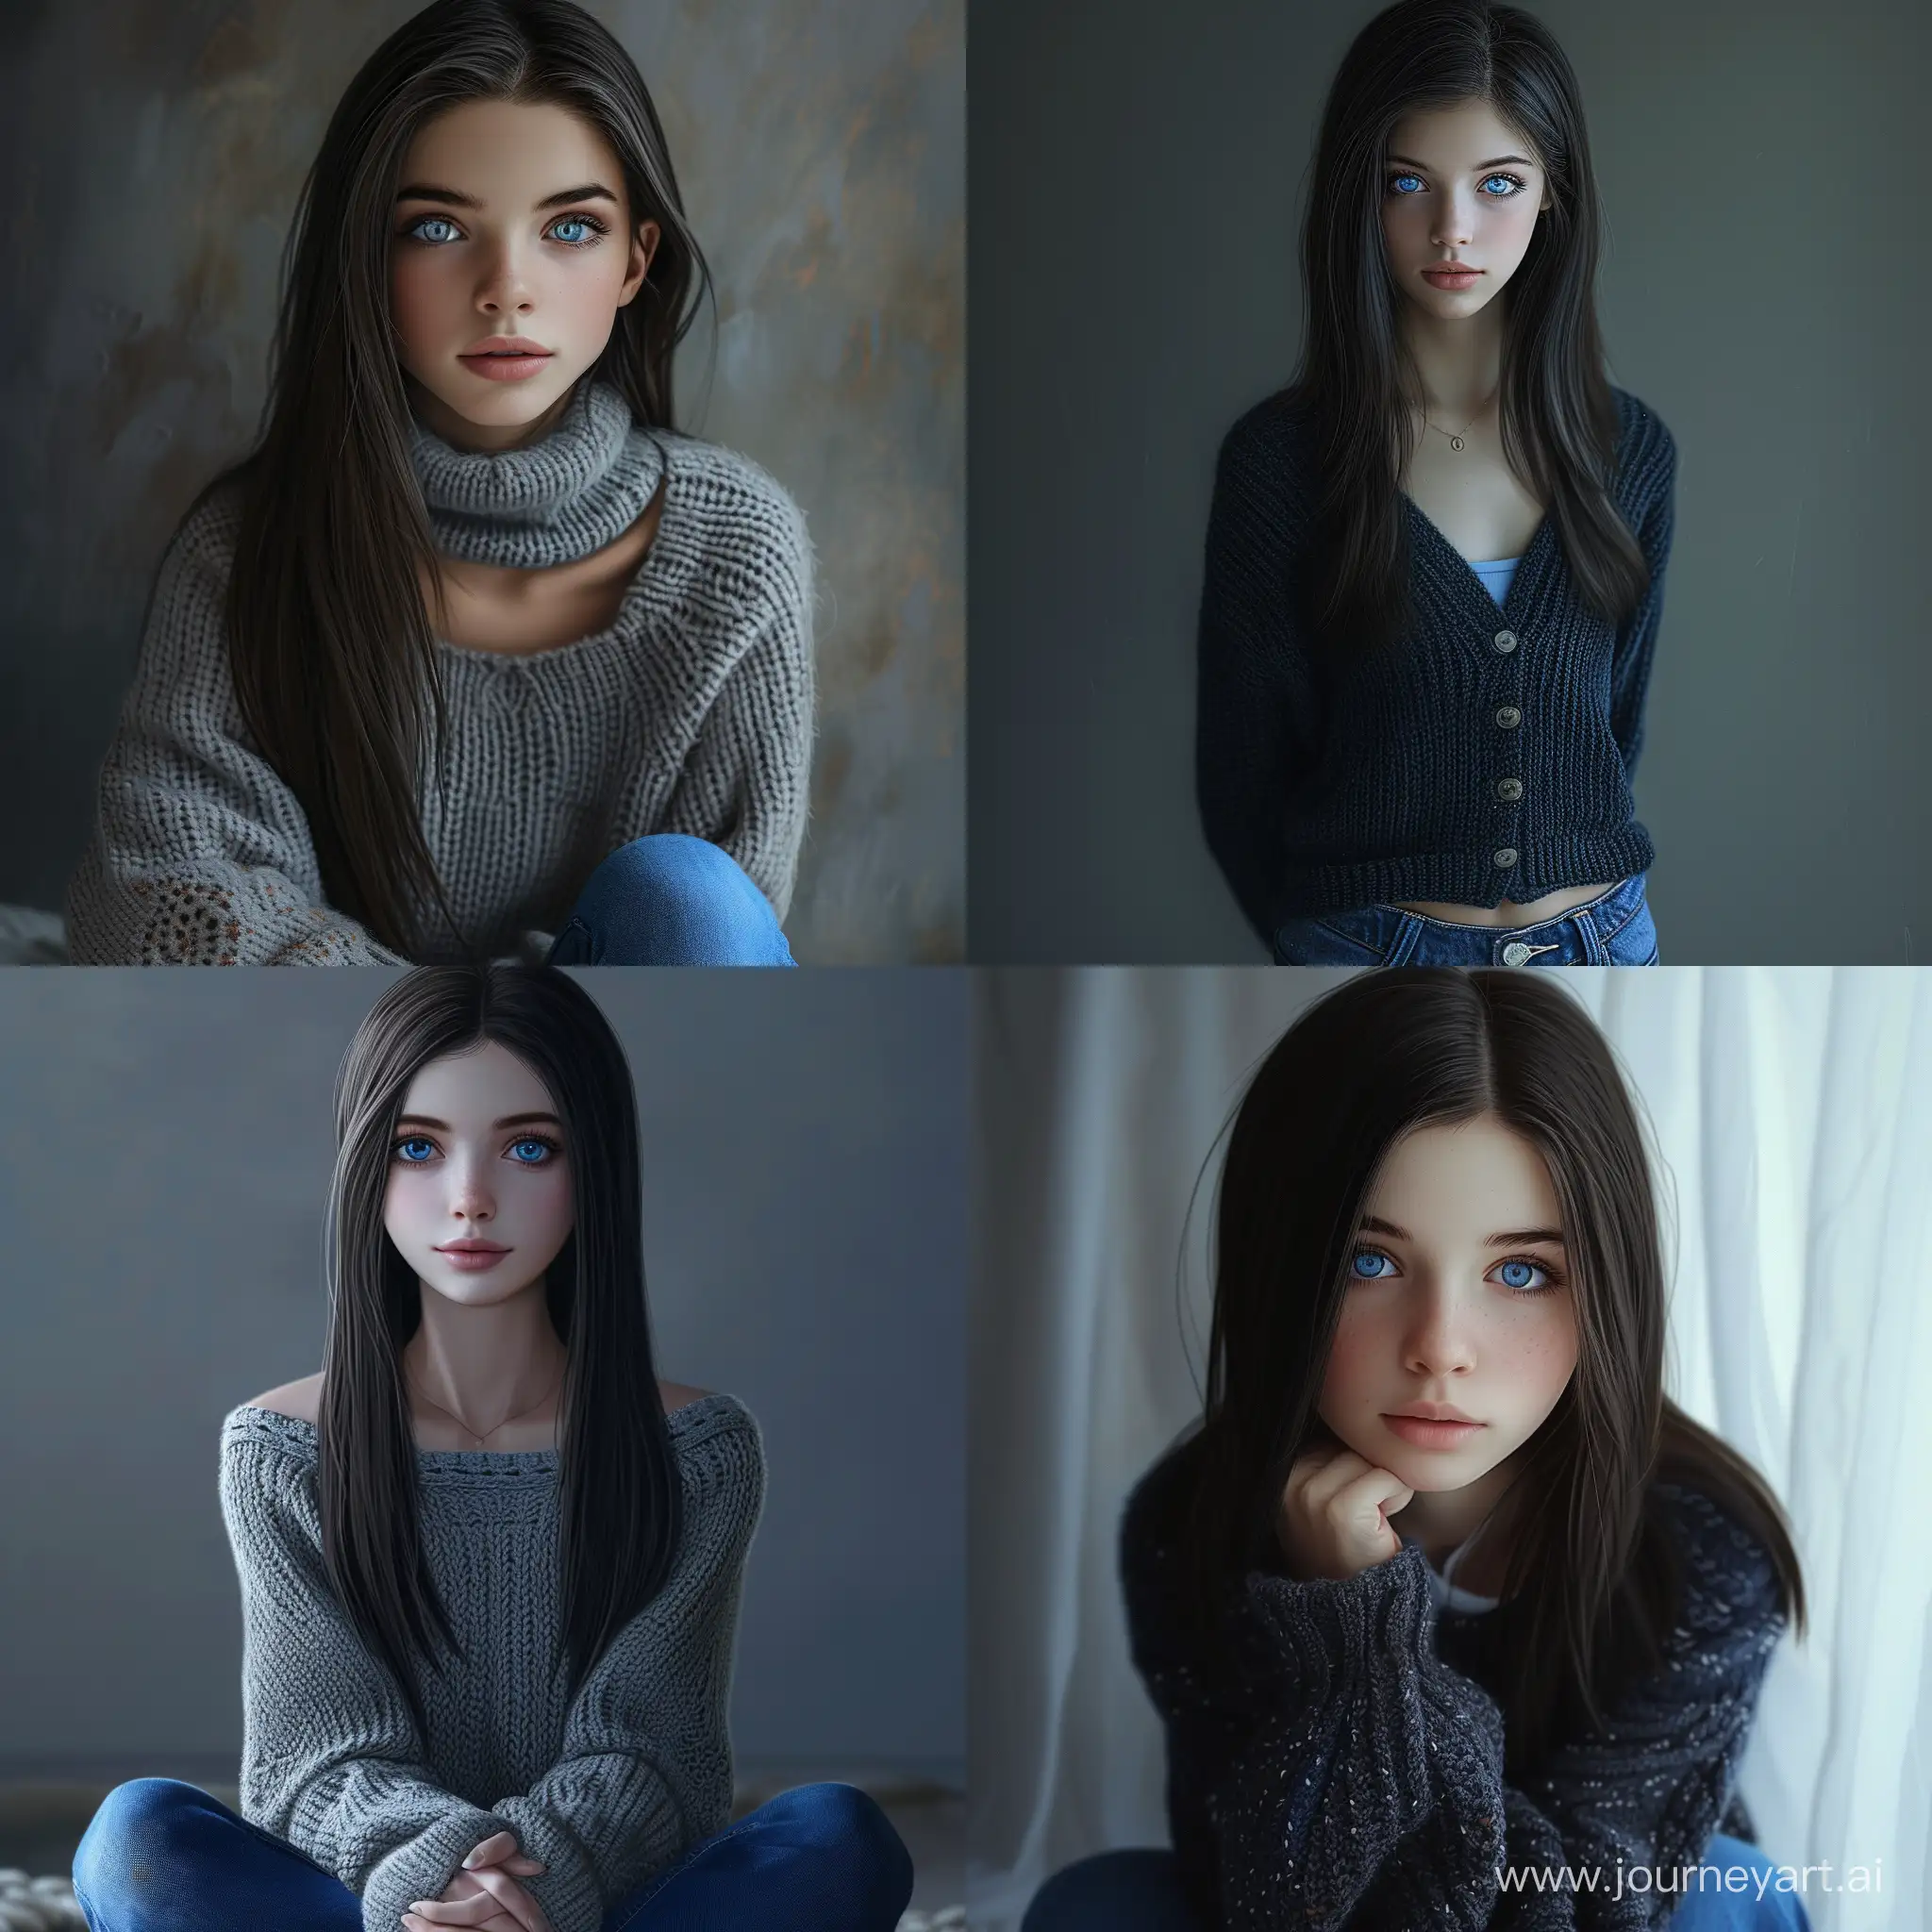 Beautiful girl, straight dark hair, blue eyes, light pale skin, thin upturned nose, oval face, teenager, 15 years old, knitted cardigan, blue jeans, high quality, high detail, realistic art